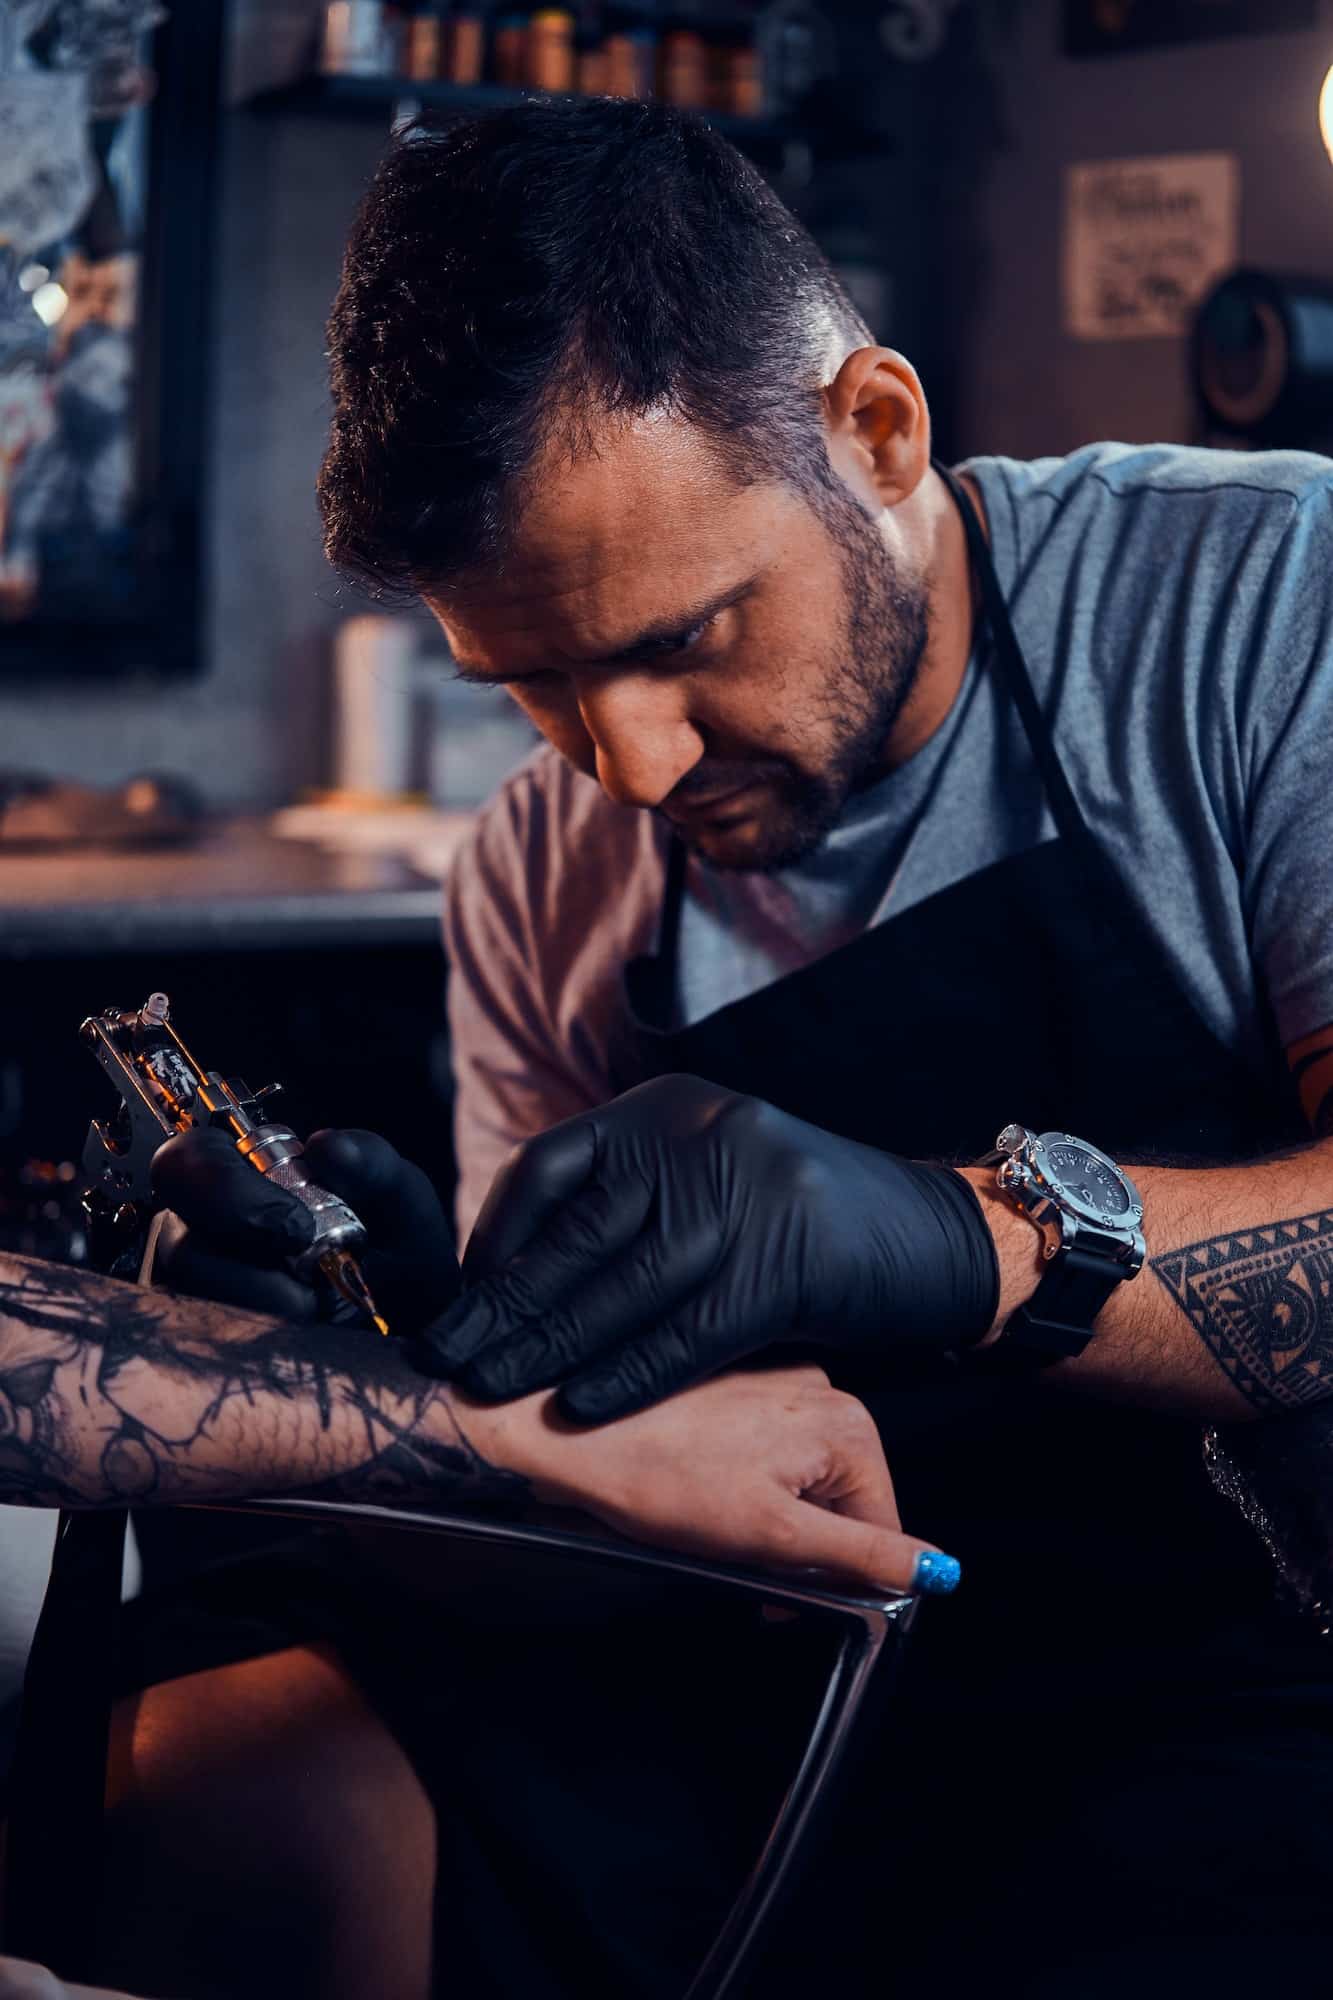 Tattoo master is creating new tattoo for customer